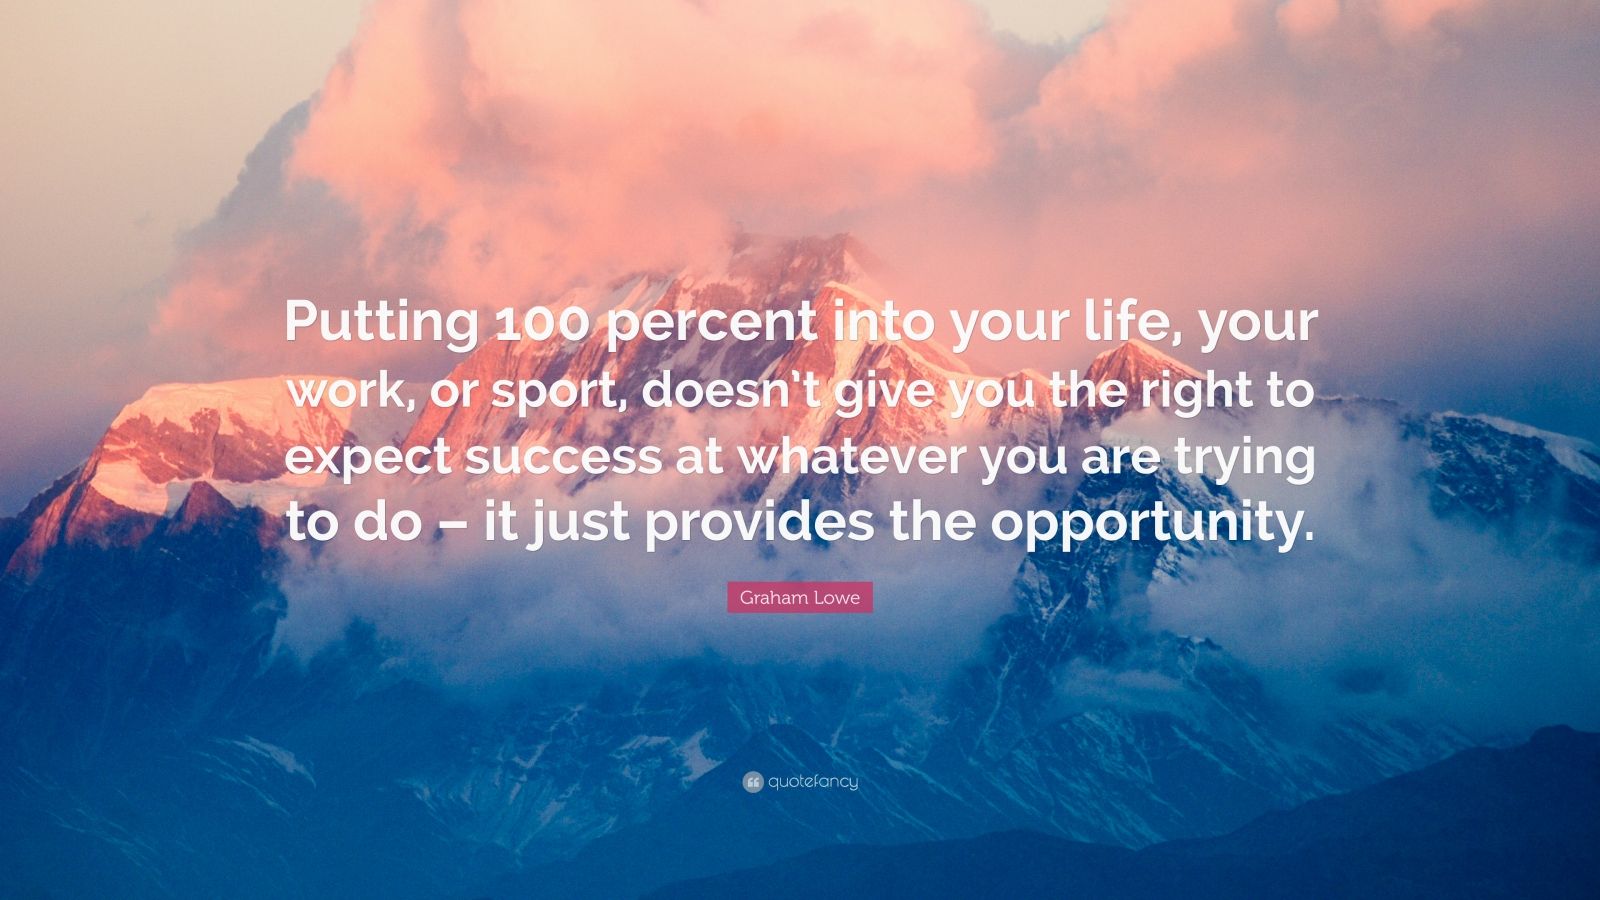 Graham Lowe Quote: “Putting 100 percent into your life, your work, or